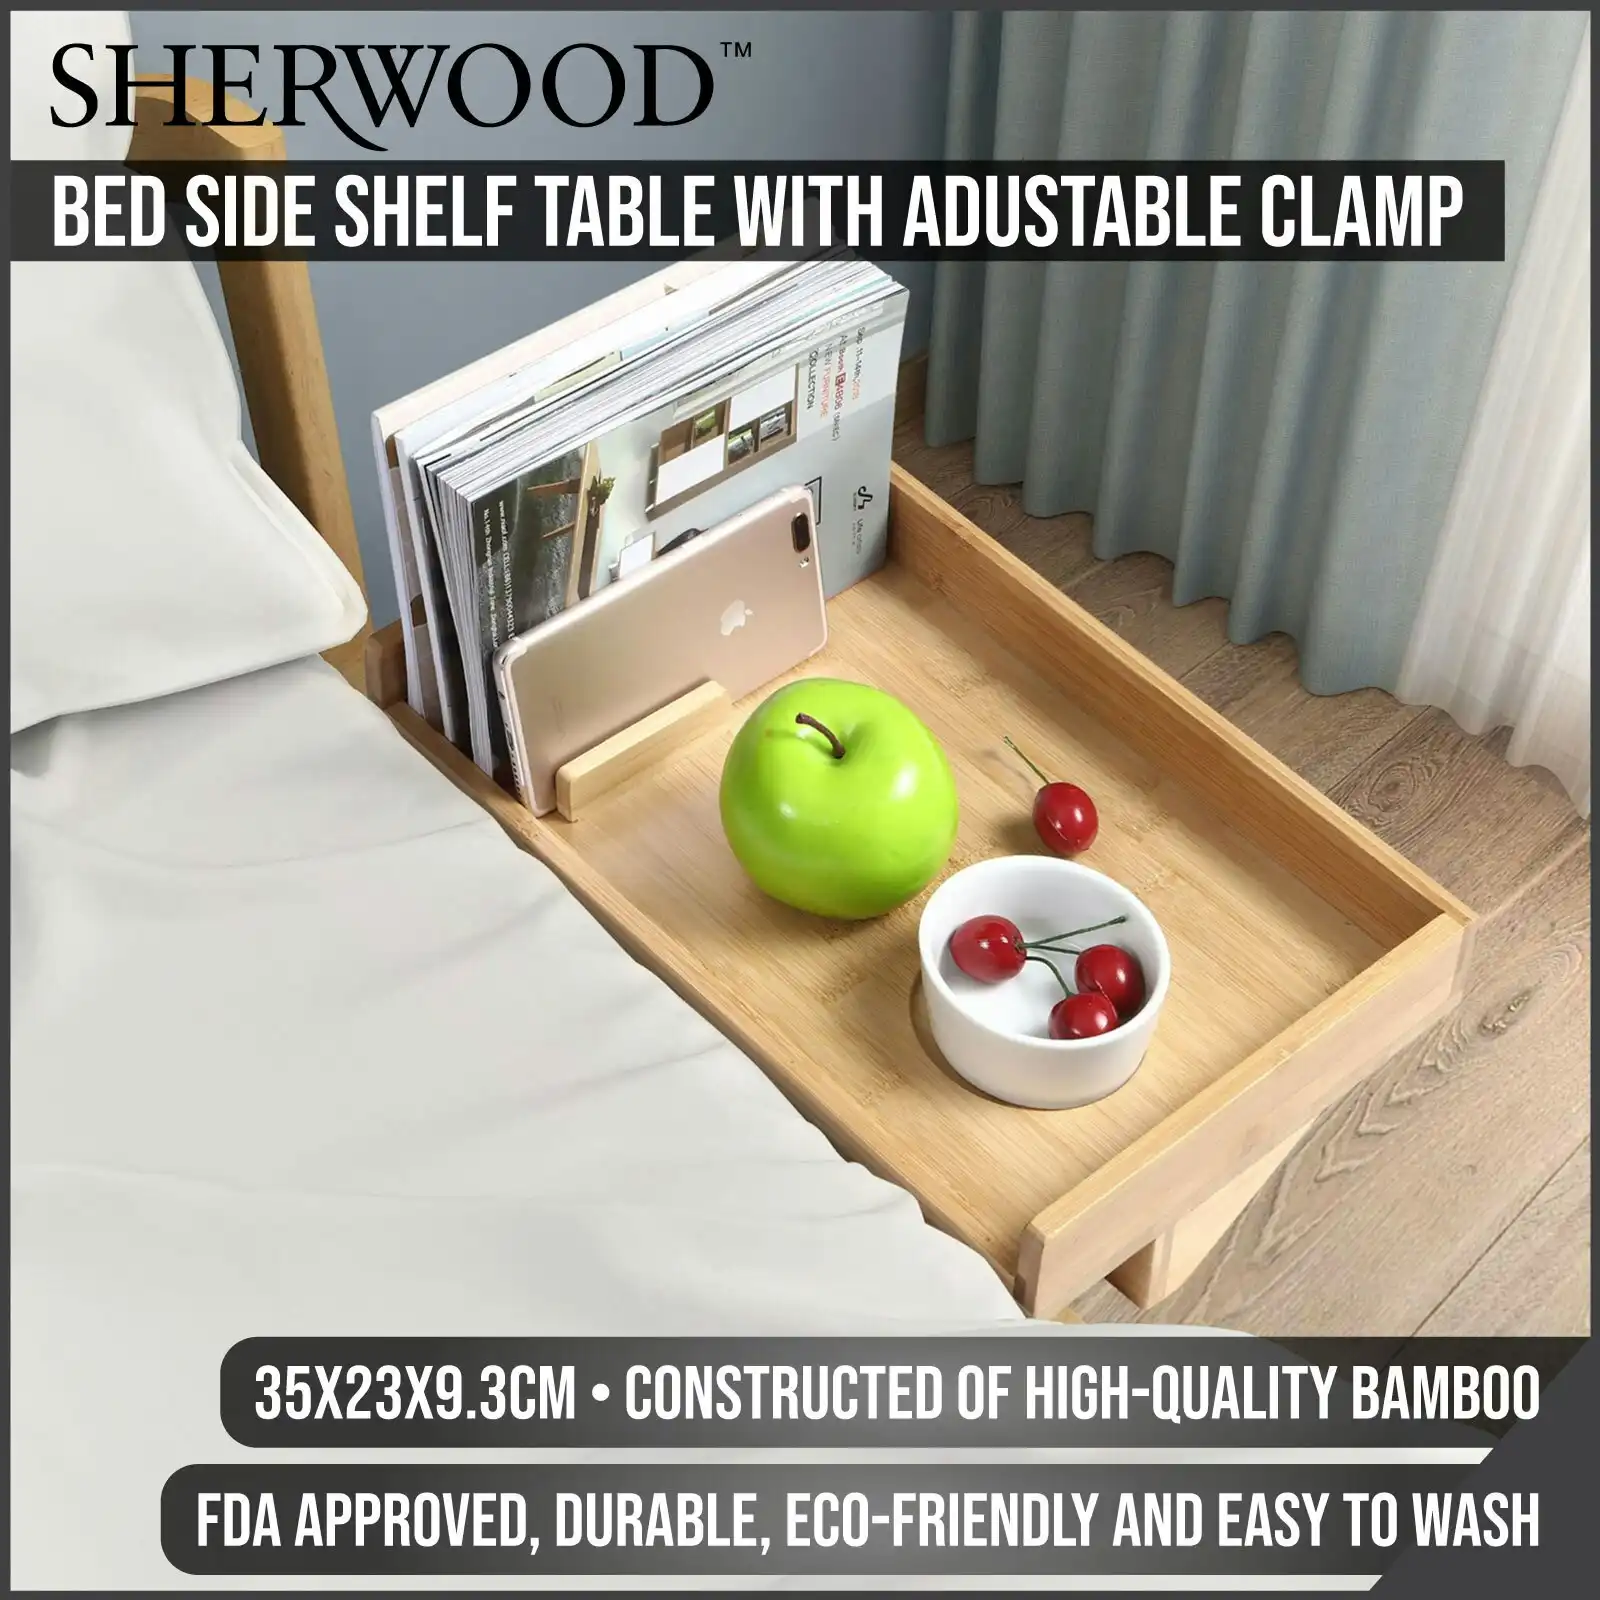 Sherwood Home Bamboo Bed Side Shelf Table with Adustable Clamp Natural Brown 35x23x9.3cm